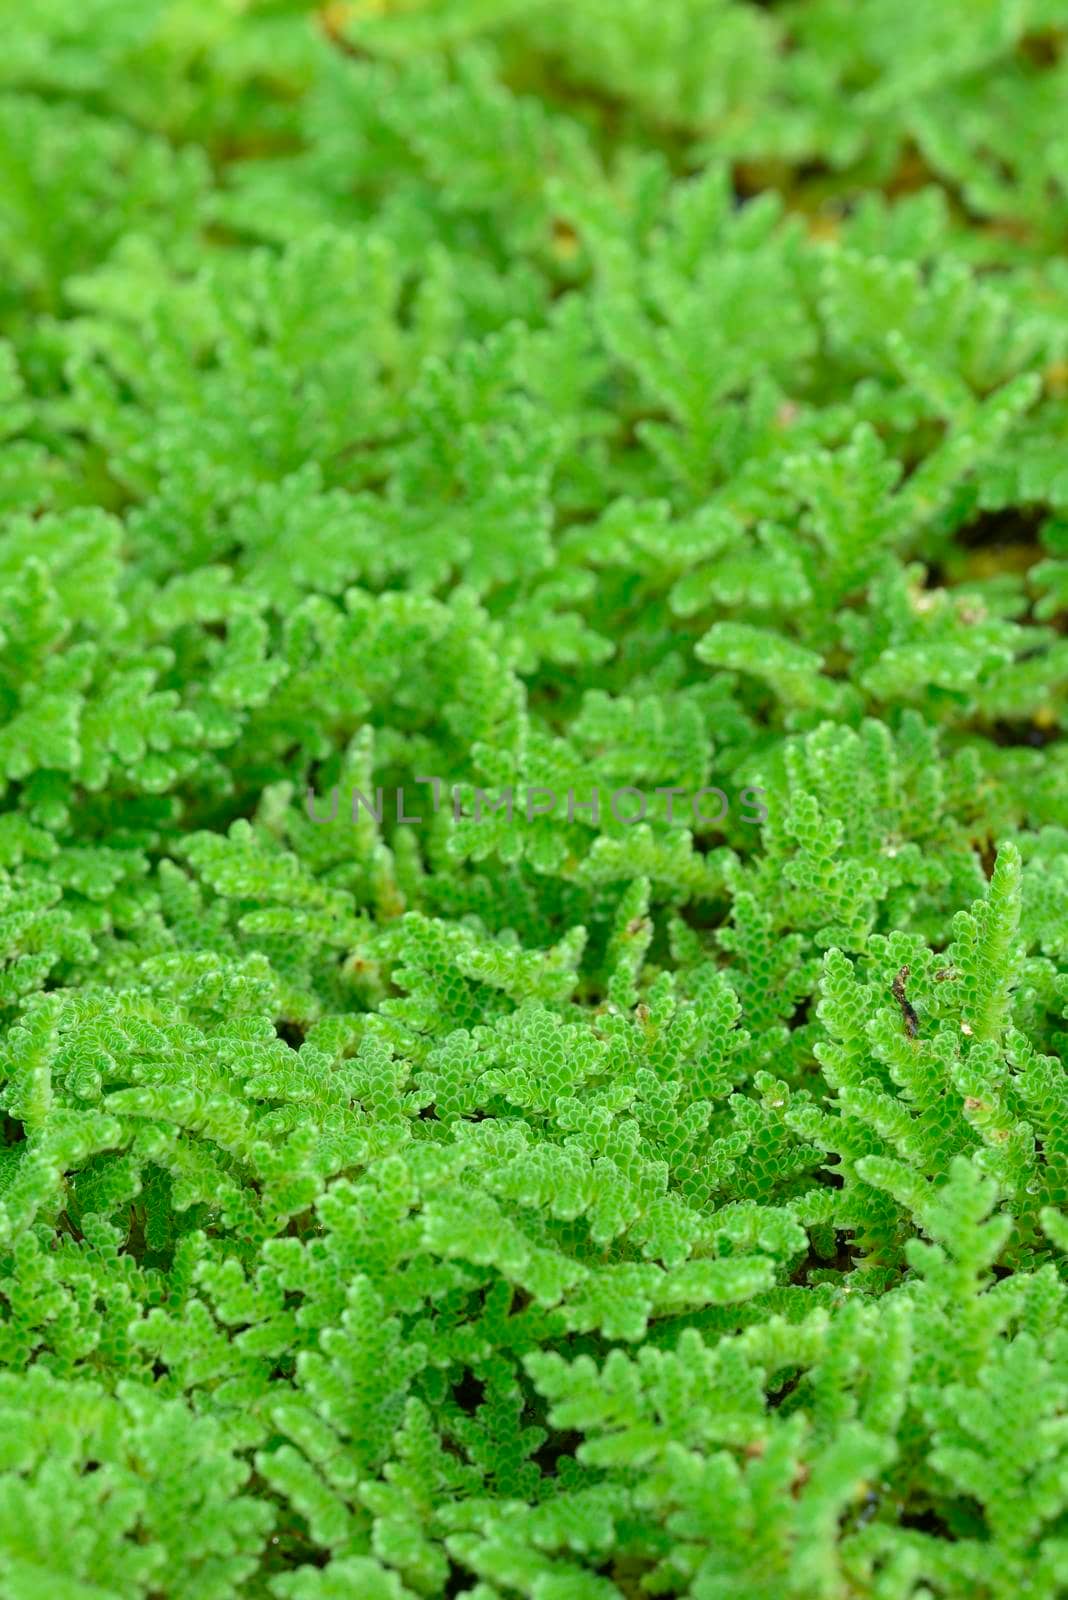 mosquito fern, fairy moss, freshwater aquatic Azolla. by AlessandroZocc